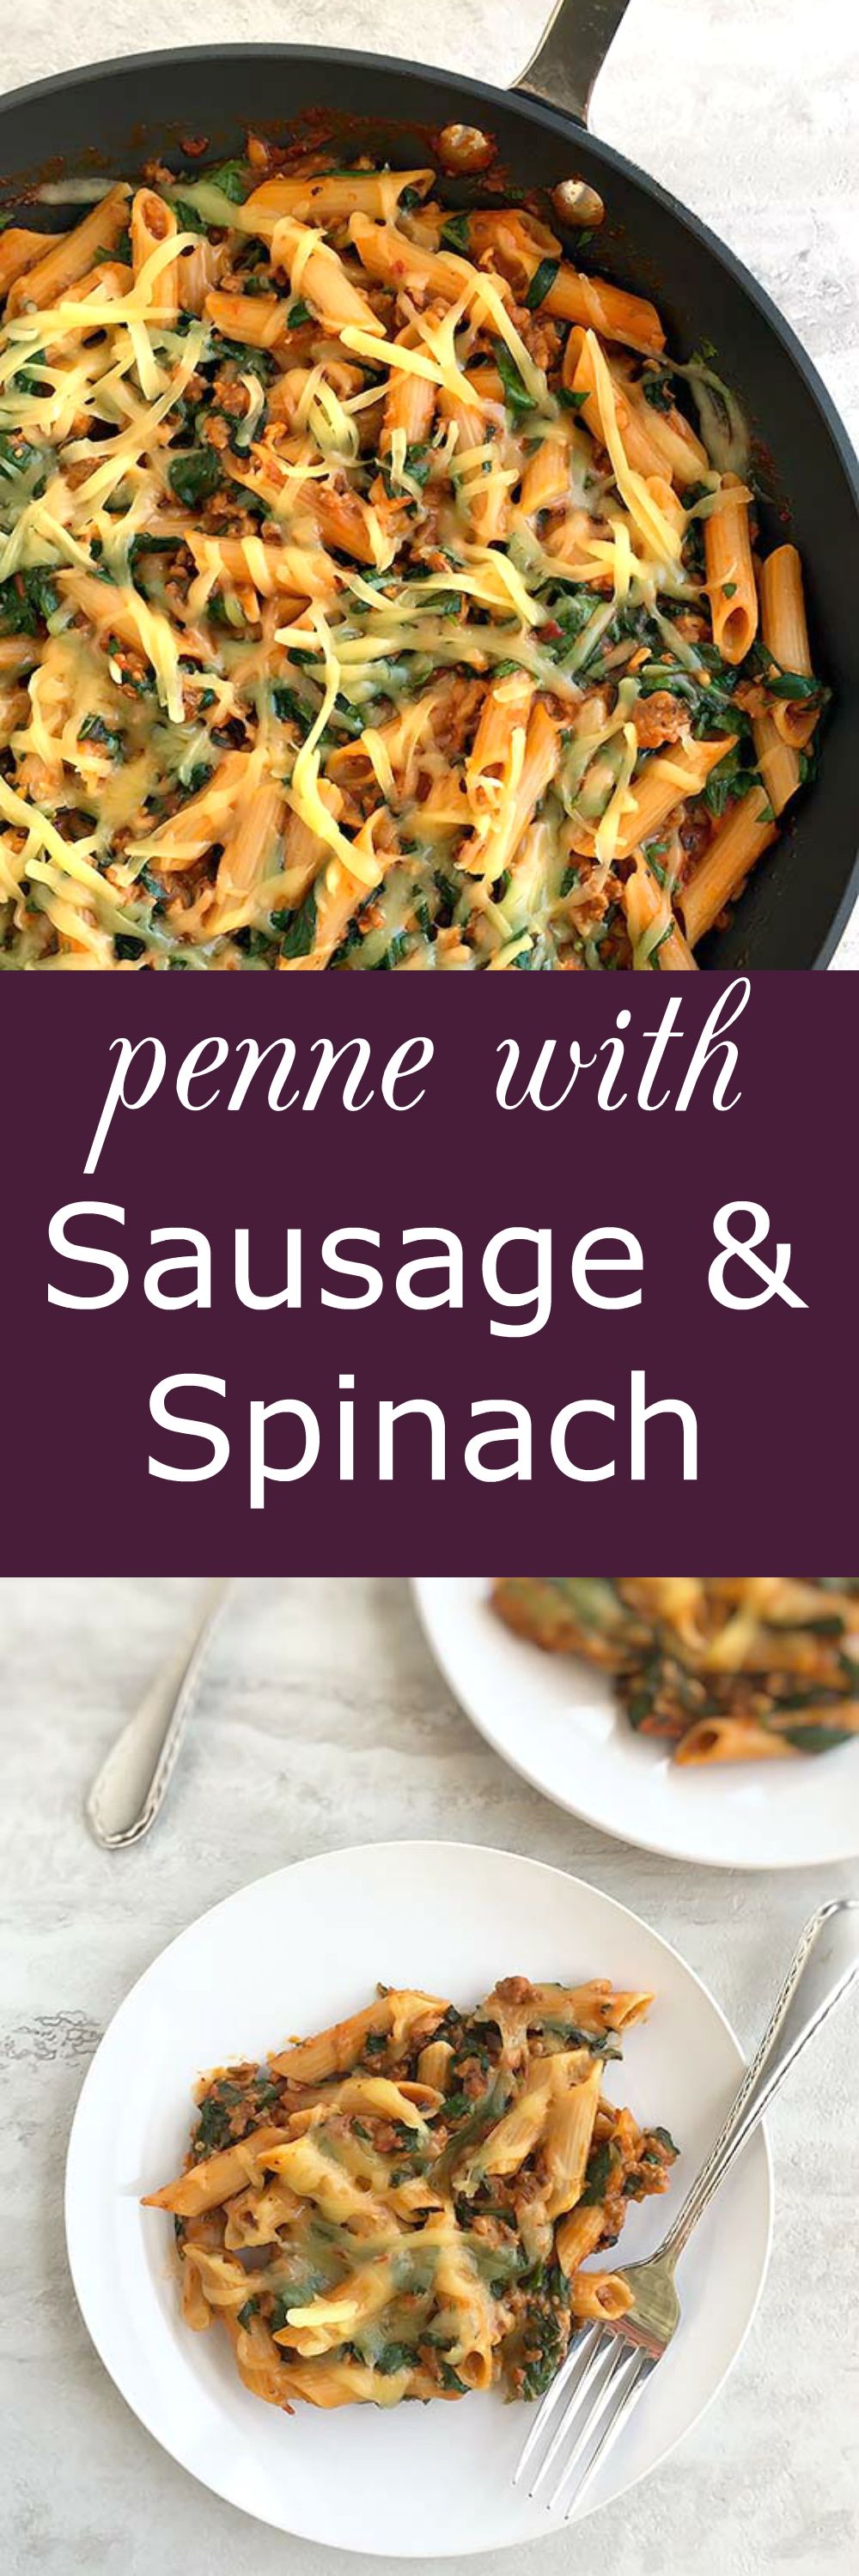 Penne-Sausage-Spinach-Pin